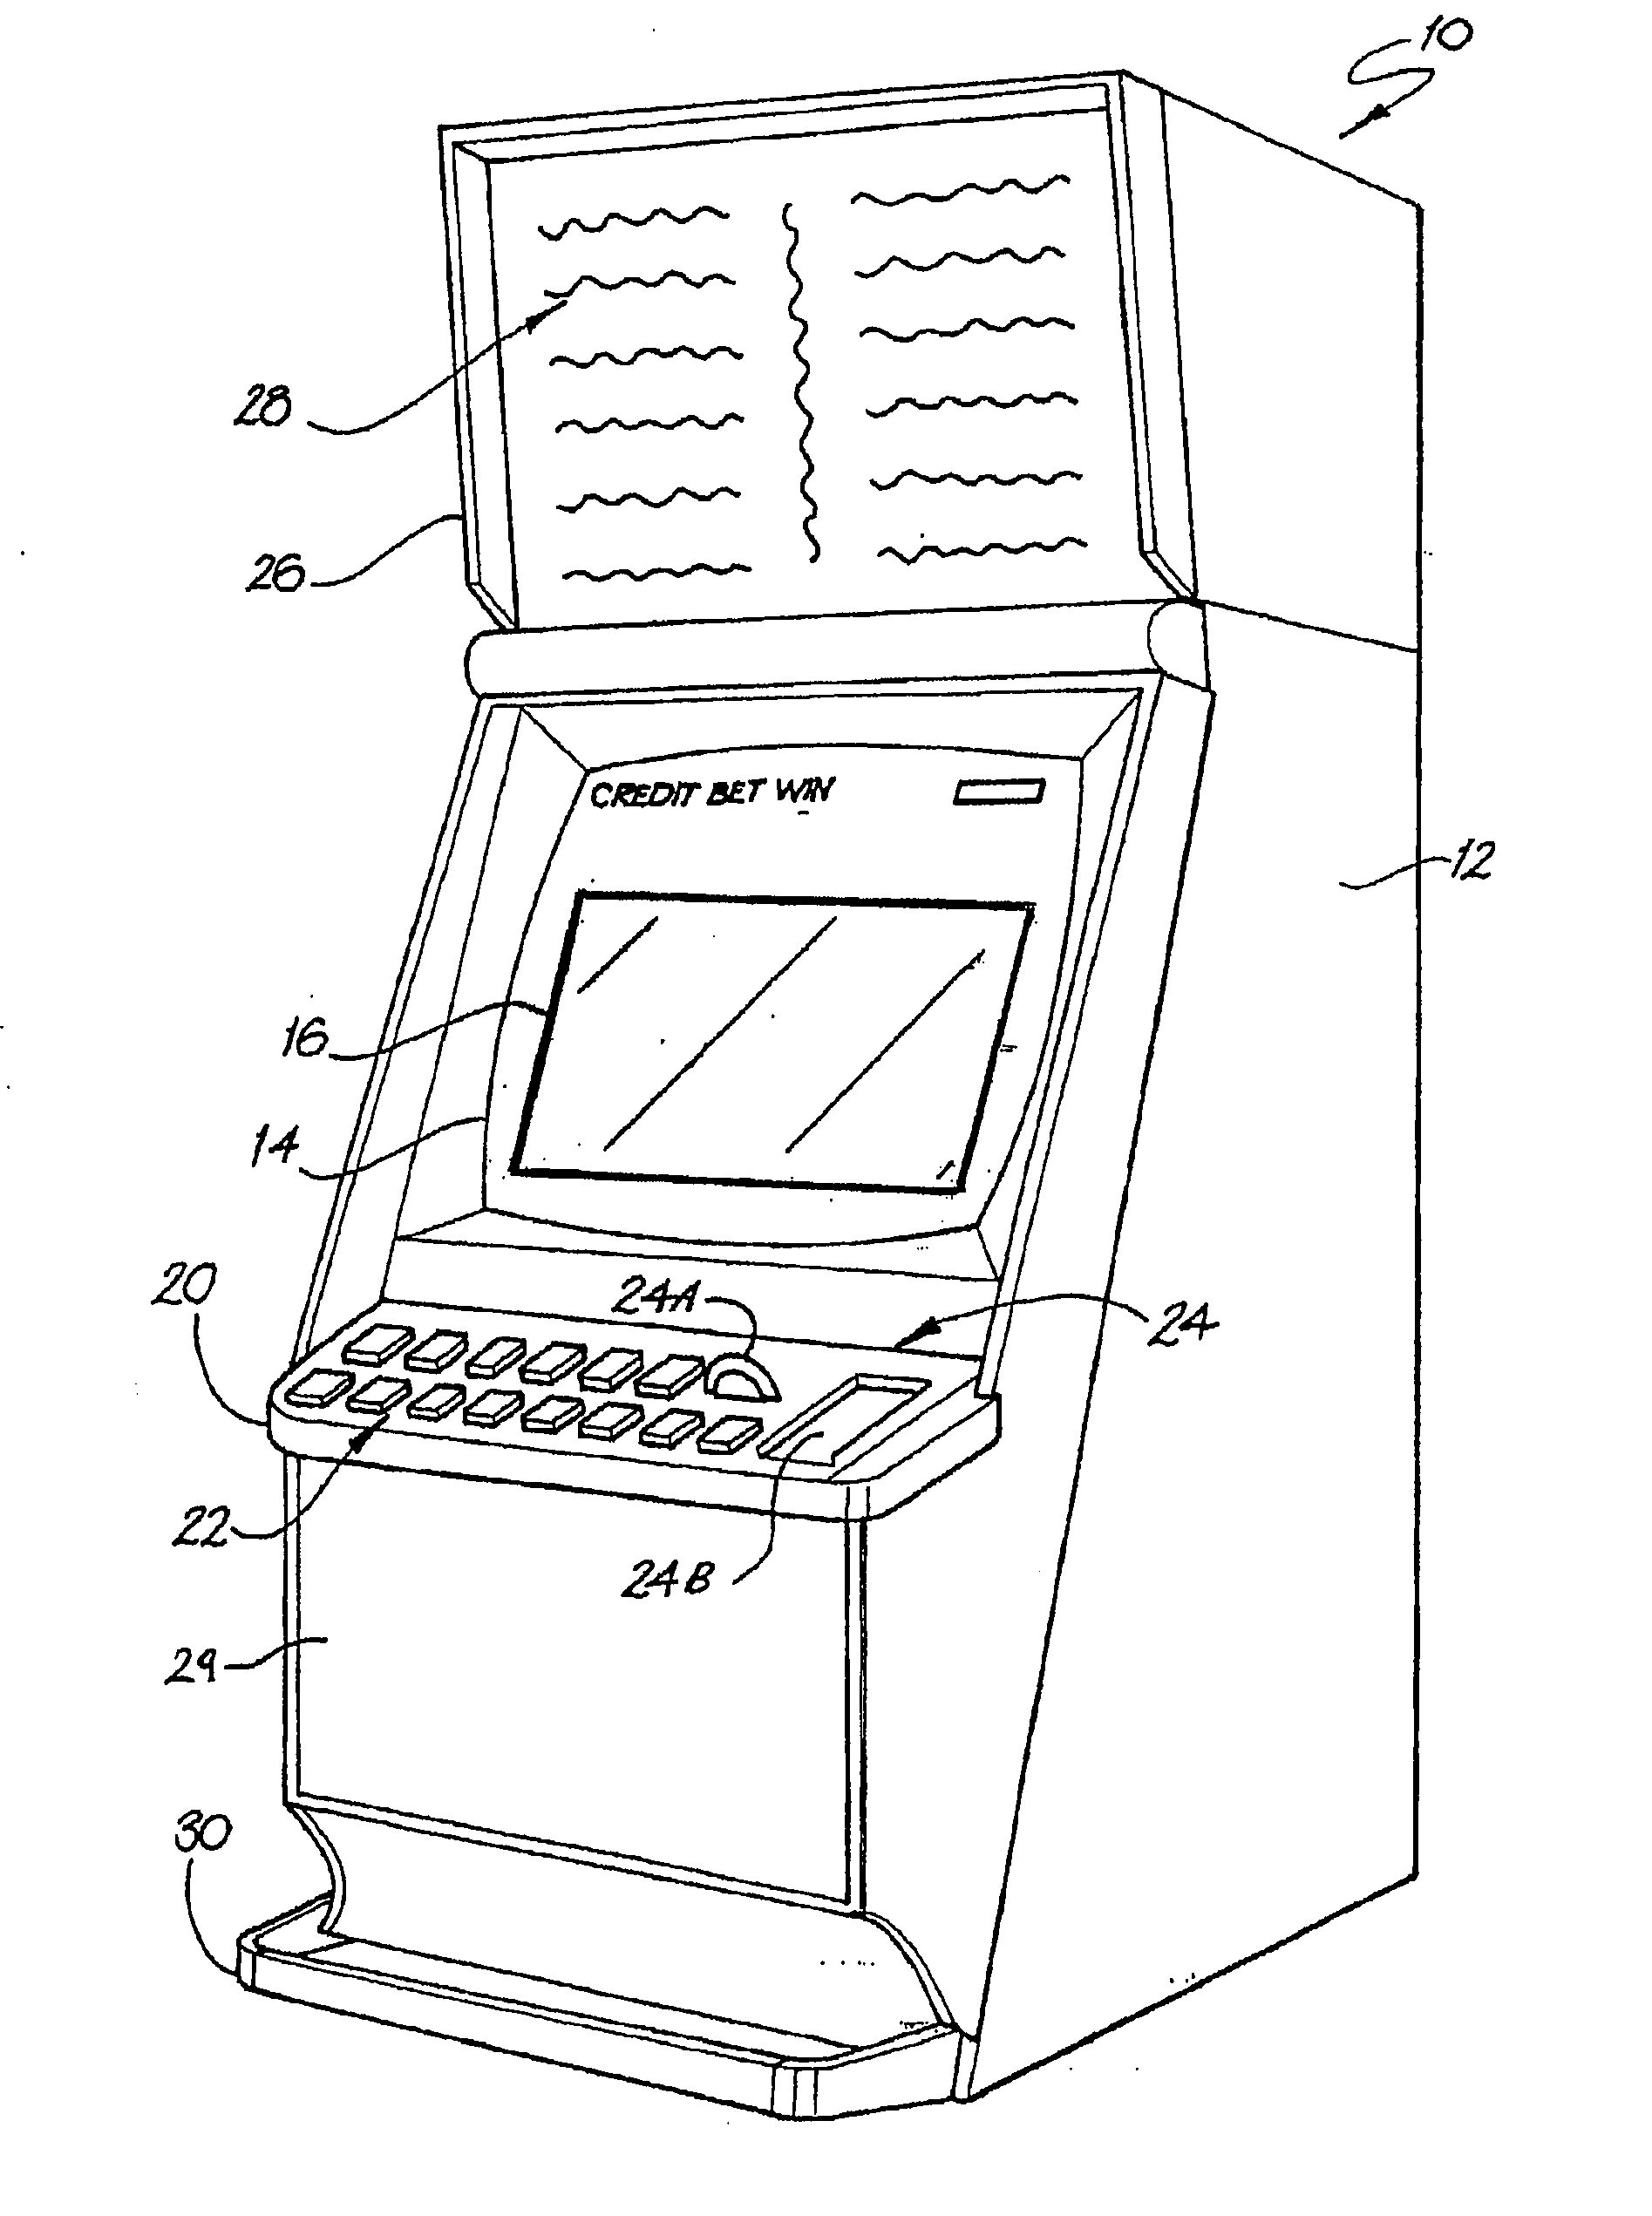 Gaming system and method with multi-sided playing elements